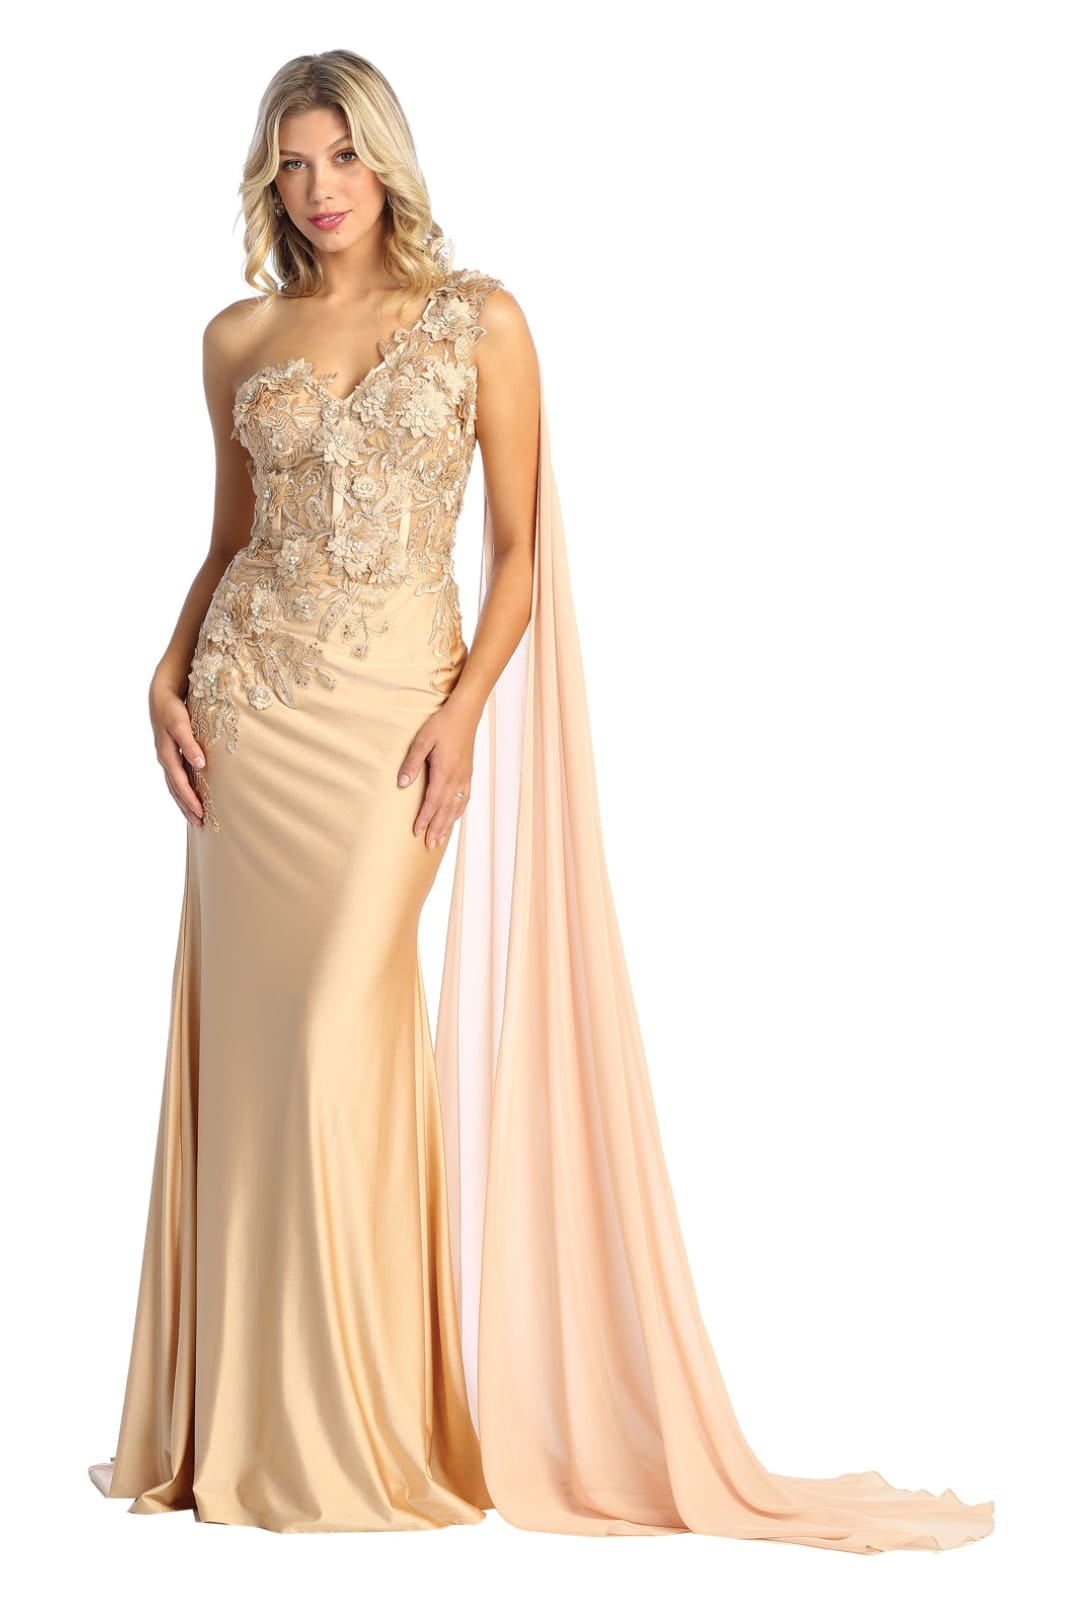 Share 151+ cream and gold evening gowns